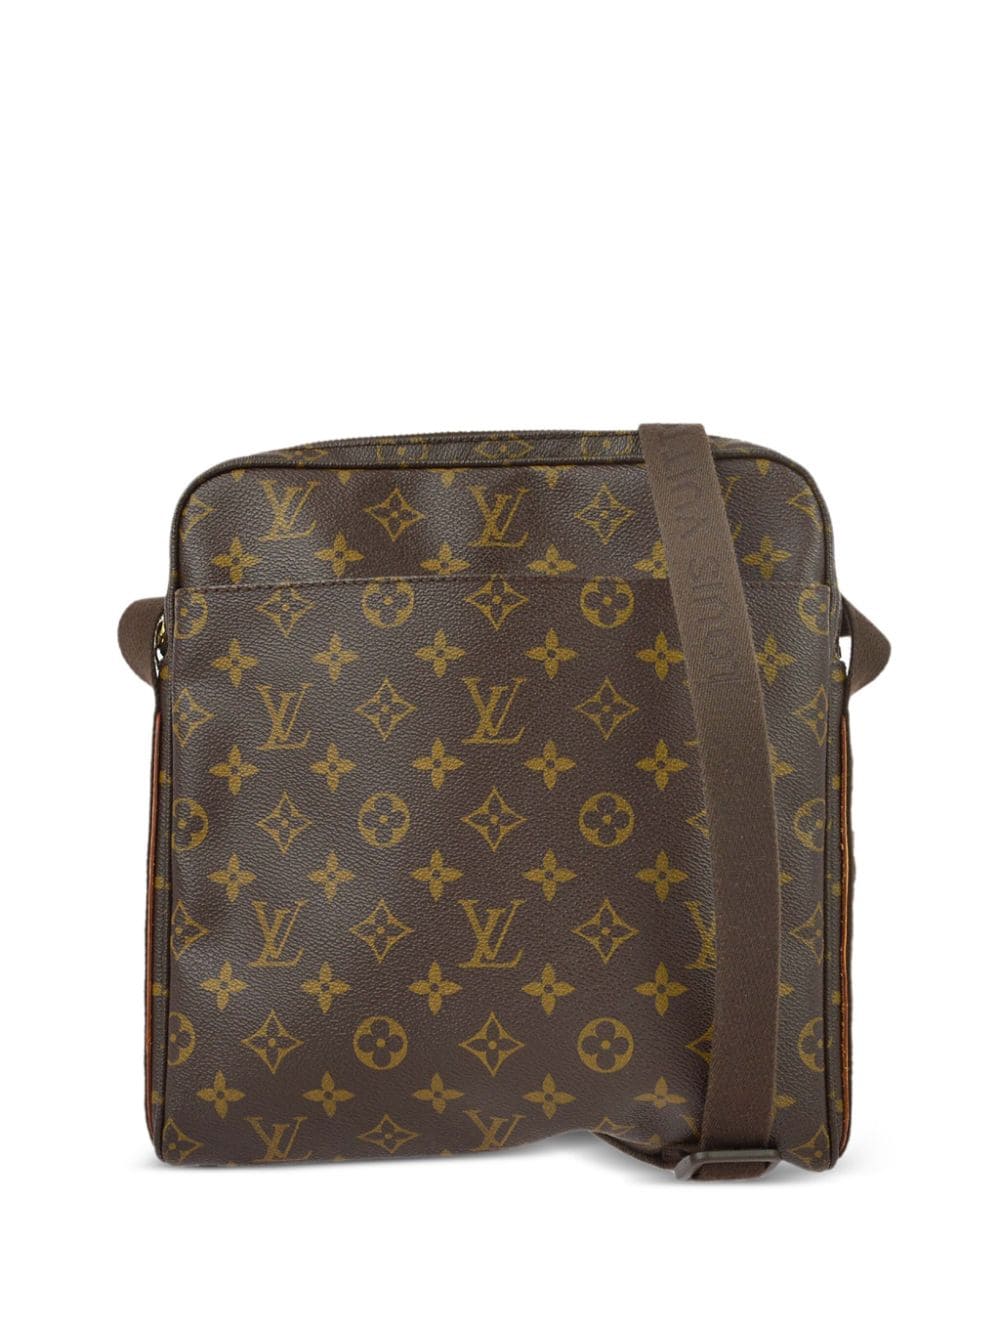 Pre-owned Louis Vuitton 2009 Trotteur Beaubourg Shoulder Bag In Brown